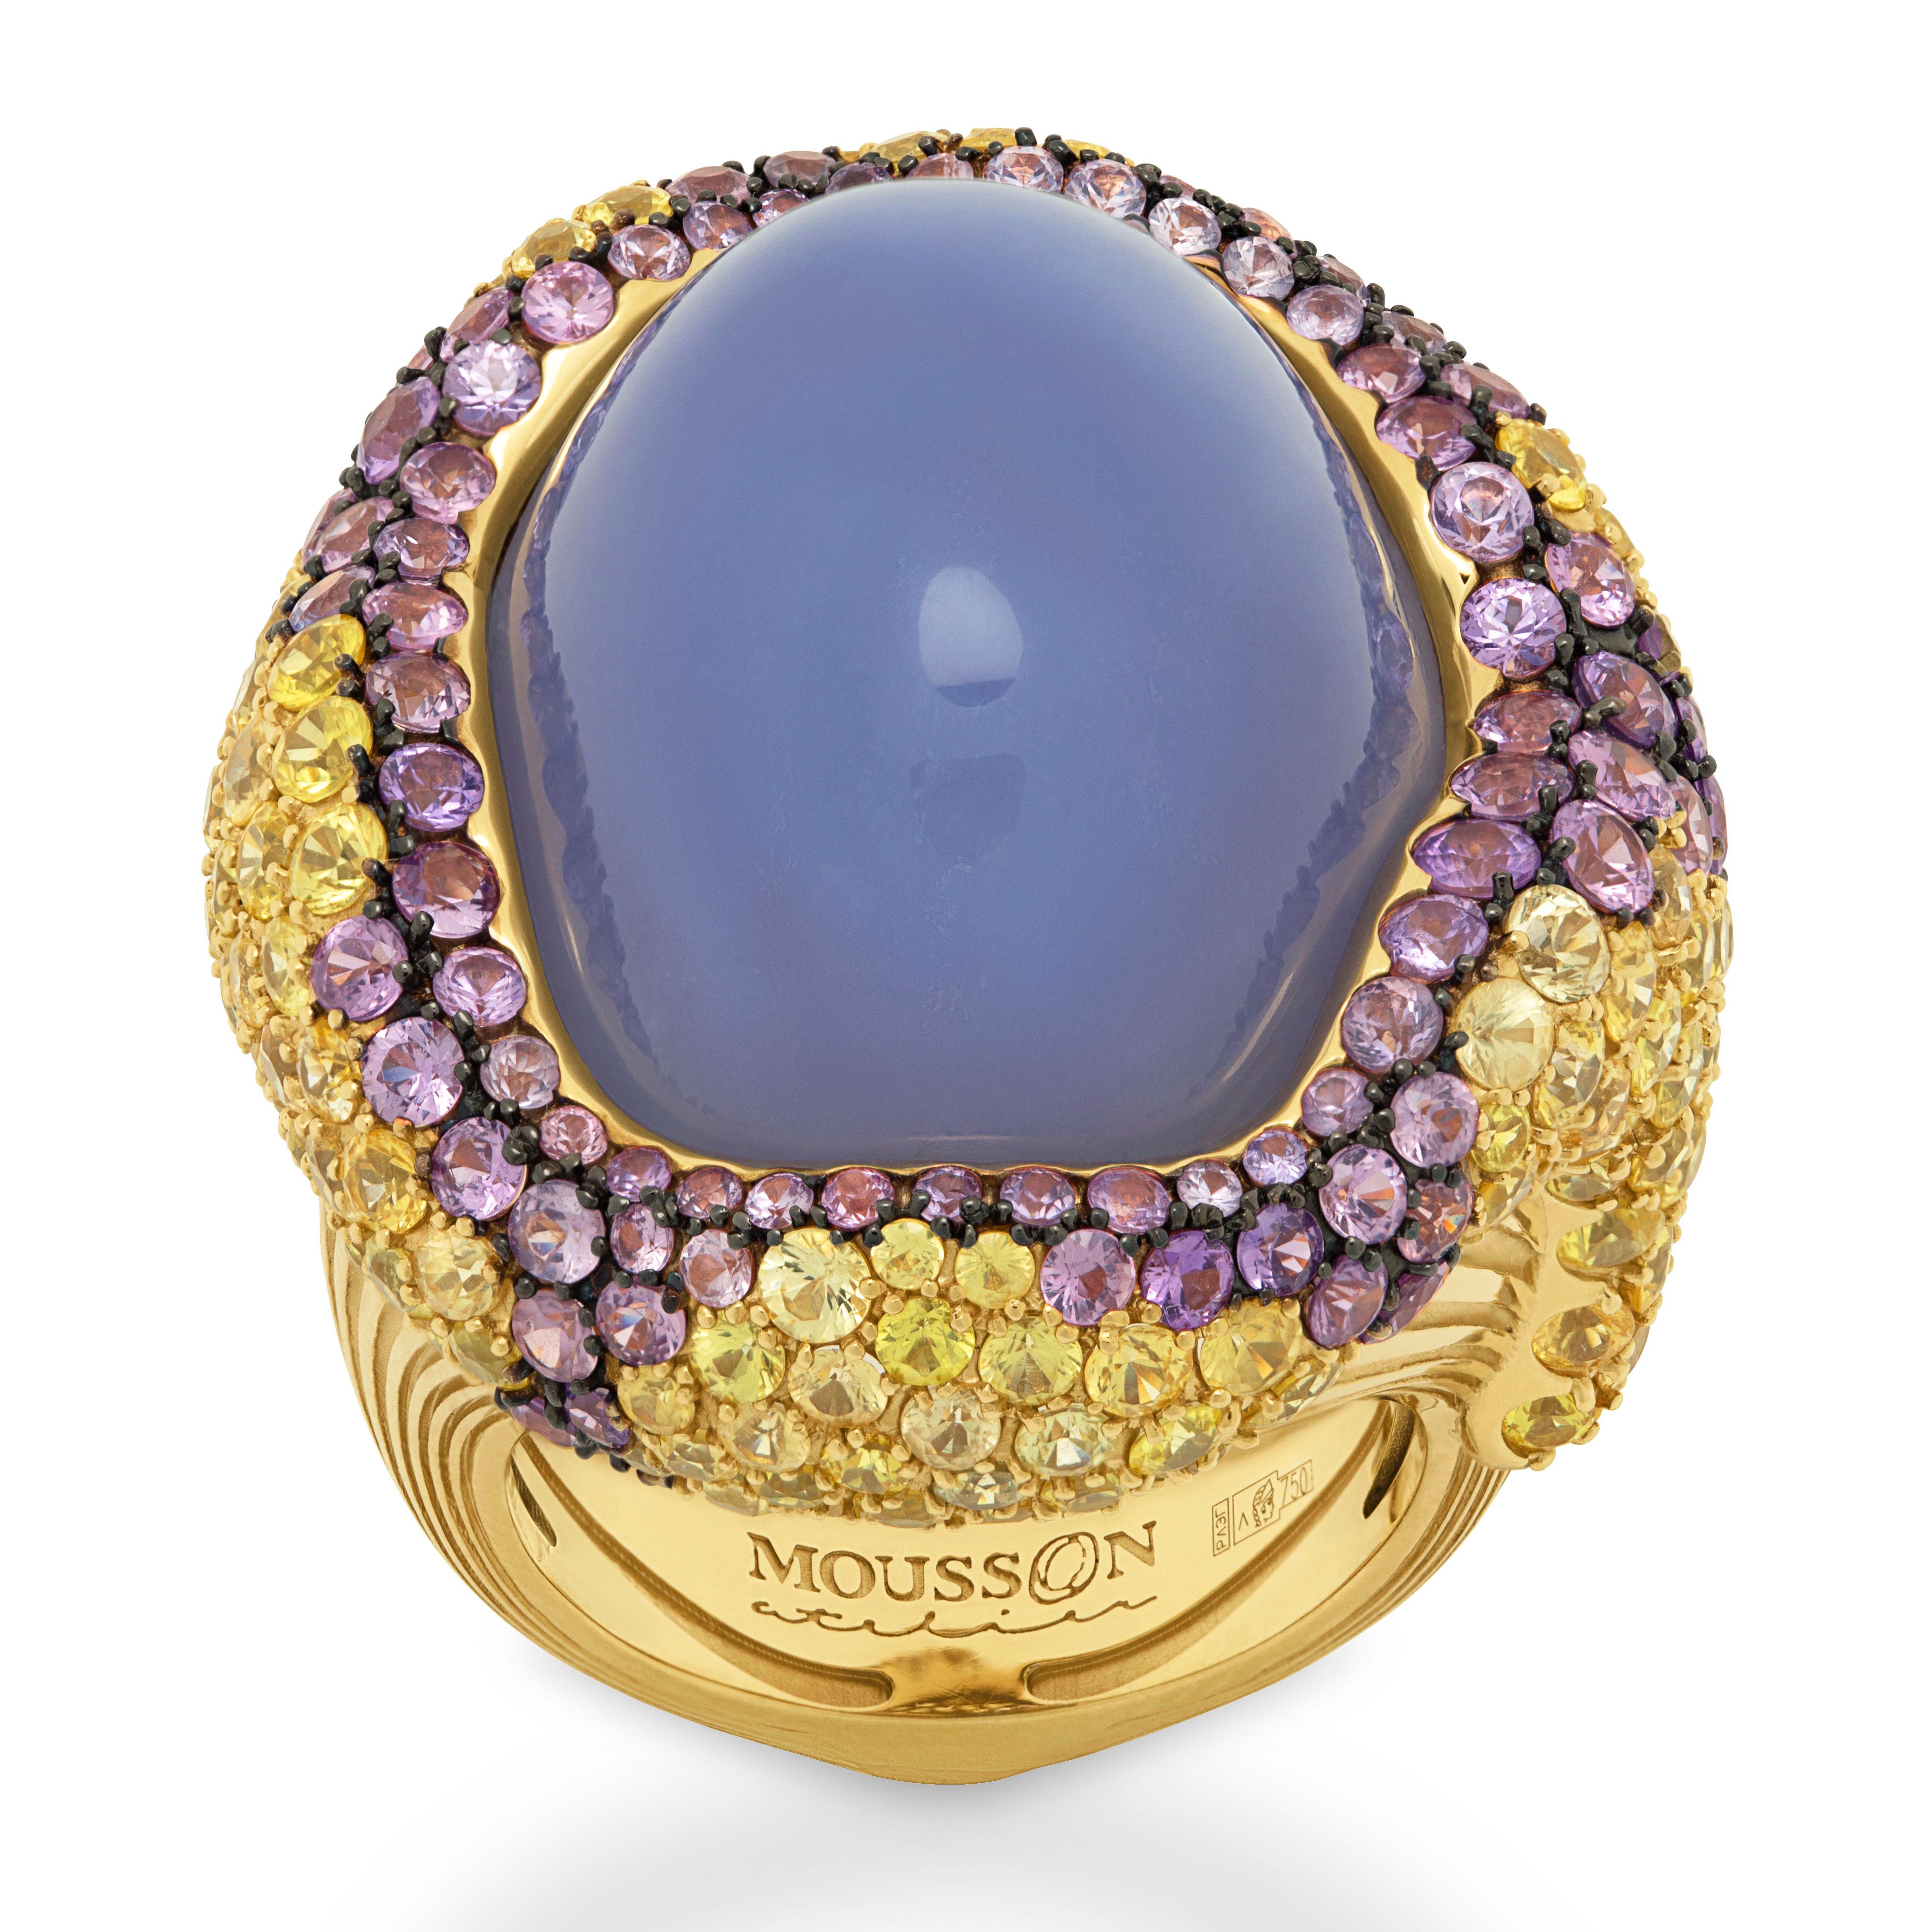 Blue Chalcedony 32.10 Carat Yellow Purple Sapphires 18 Karat Yellow Gold Ring
Absolutely spectacular Blue Chalcedony Cabochon-shape weighing 32.10 Carat in our Ring from 